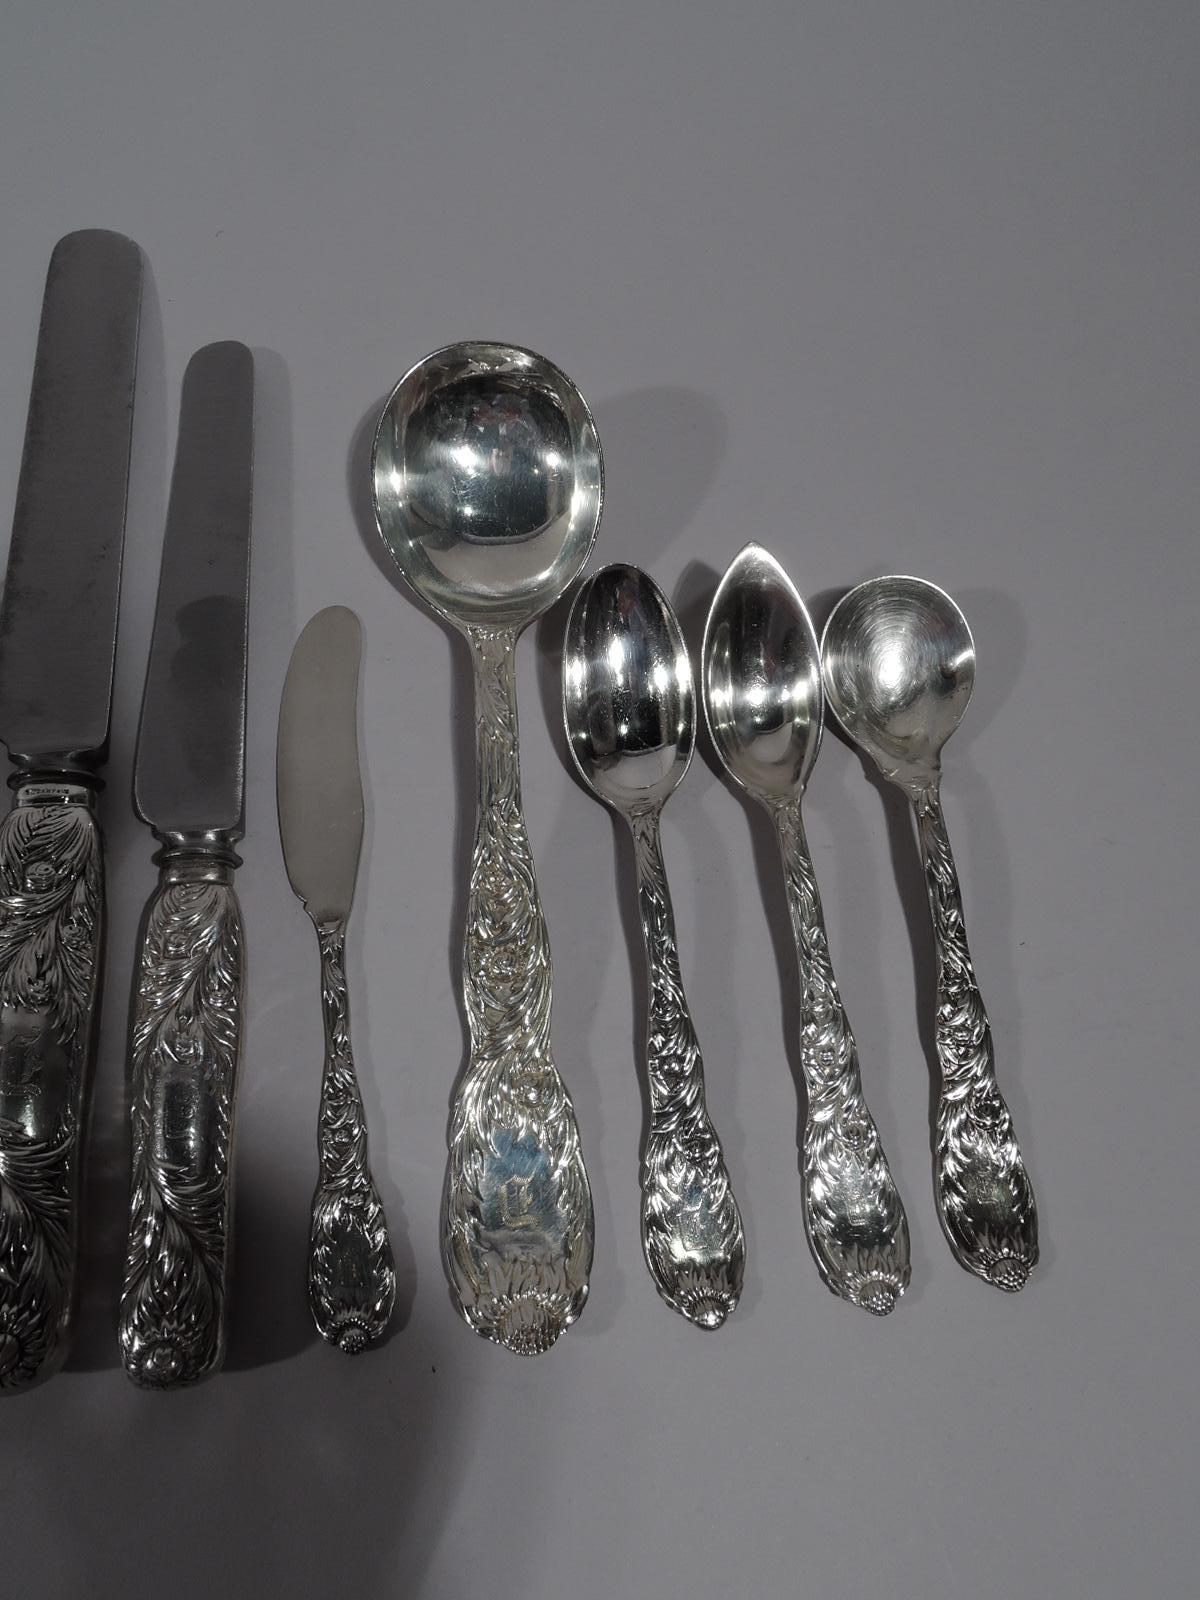 Japonisme Tiffany Chrysanthemum Sterling Silver Dinner Set with 145 Pieces For Sale